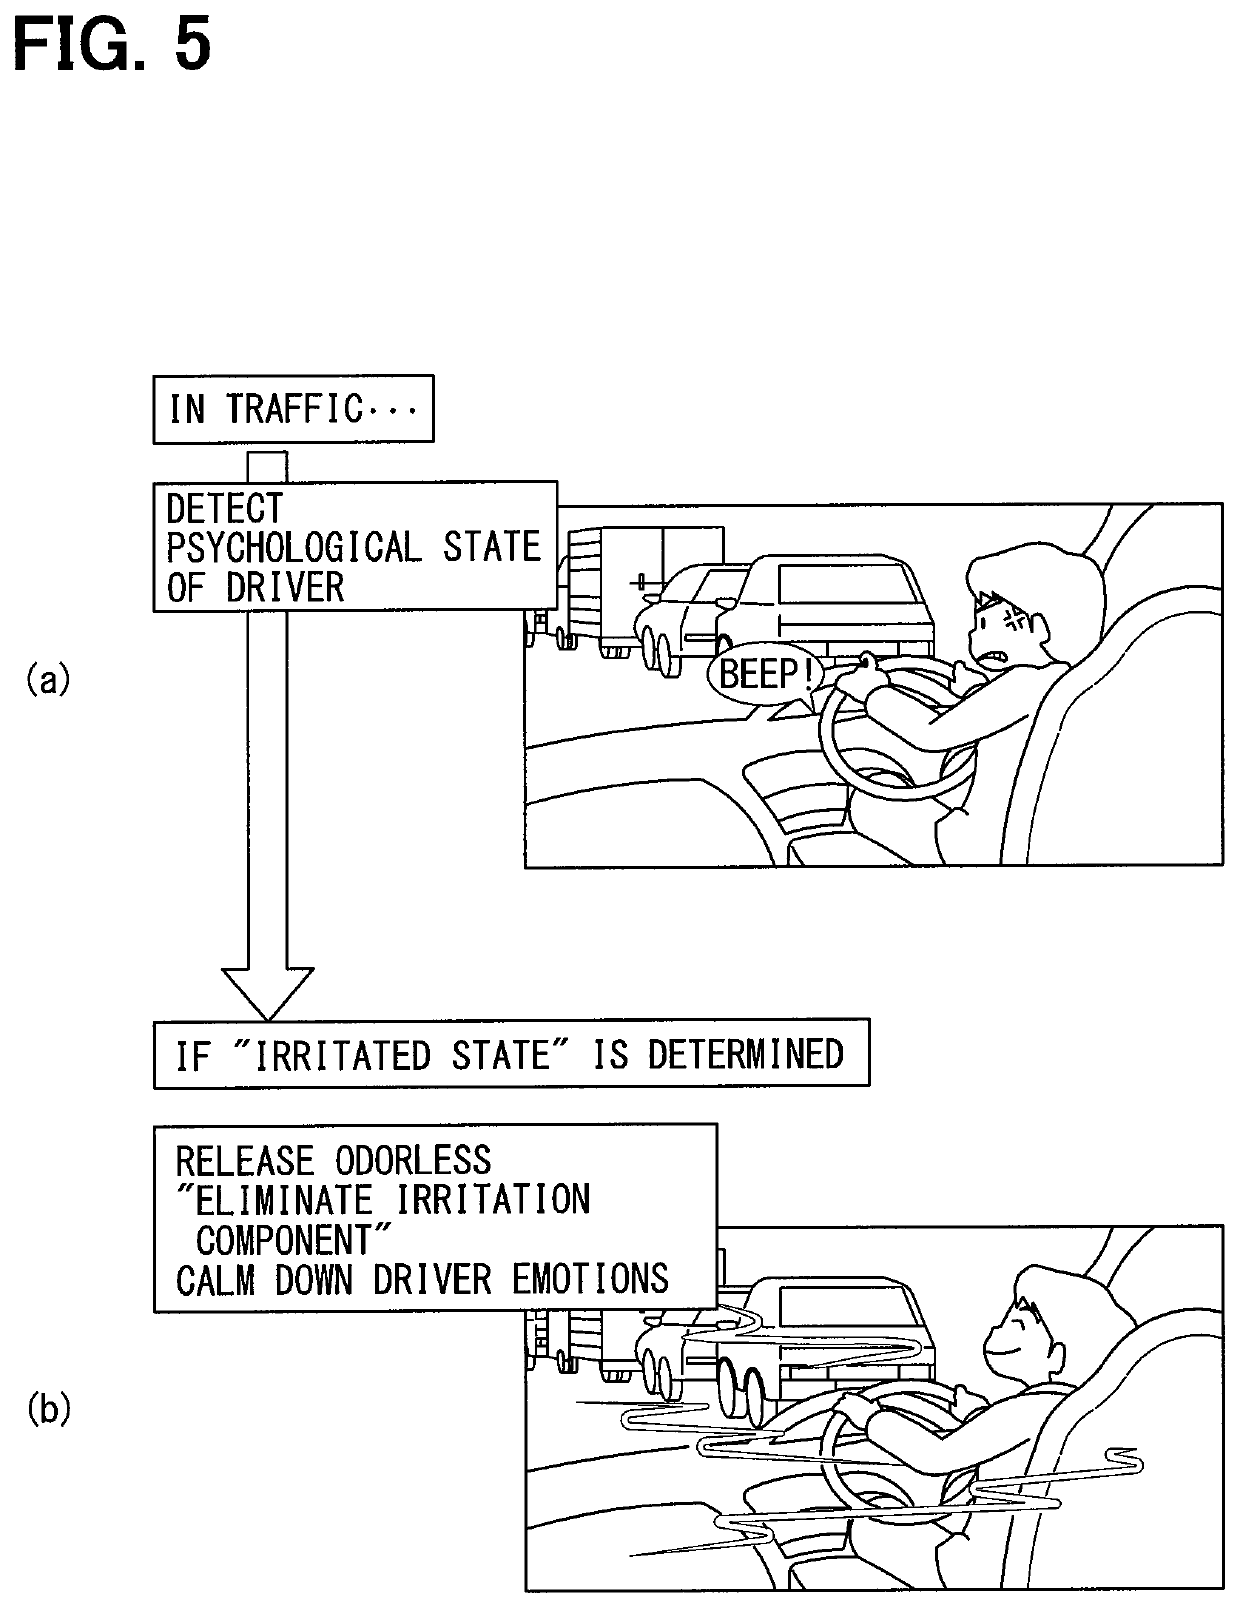 Stress relieving device for vehicles